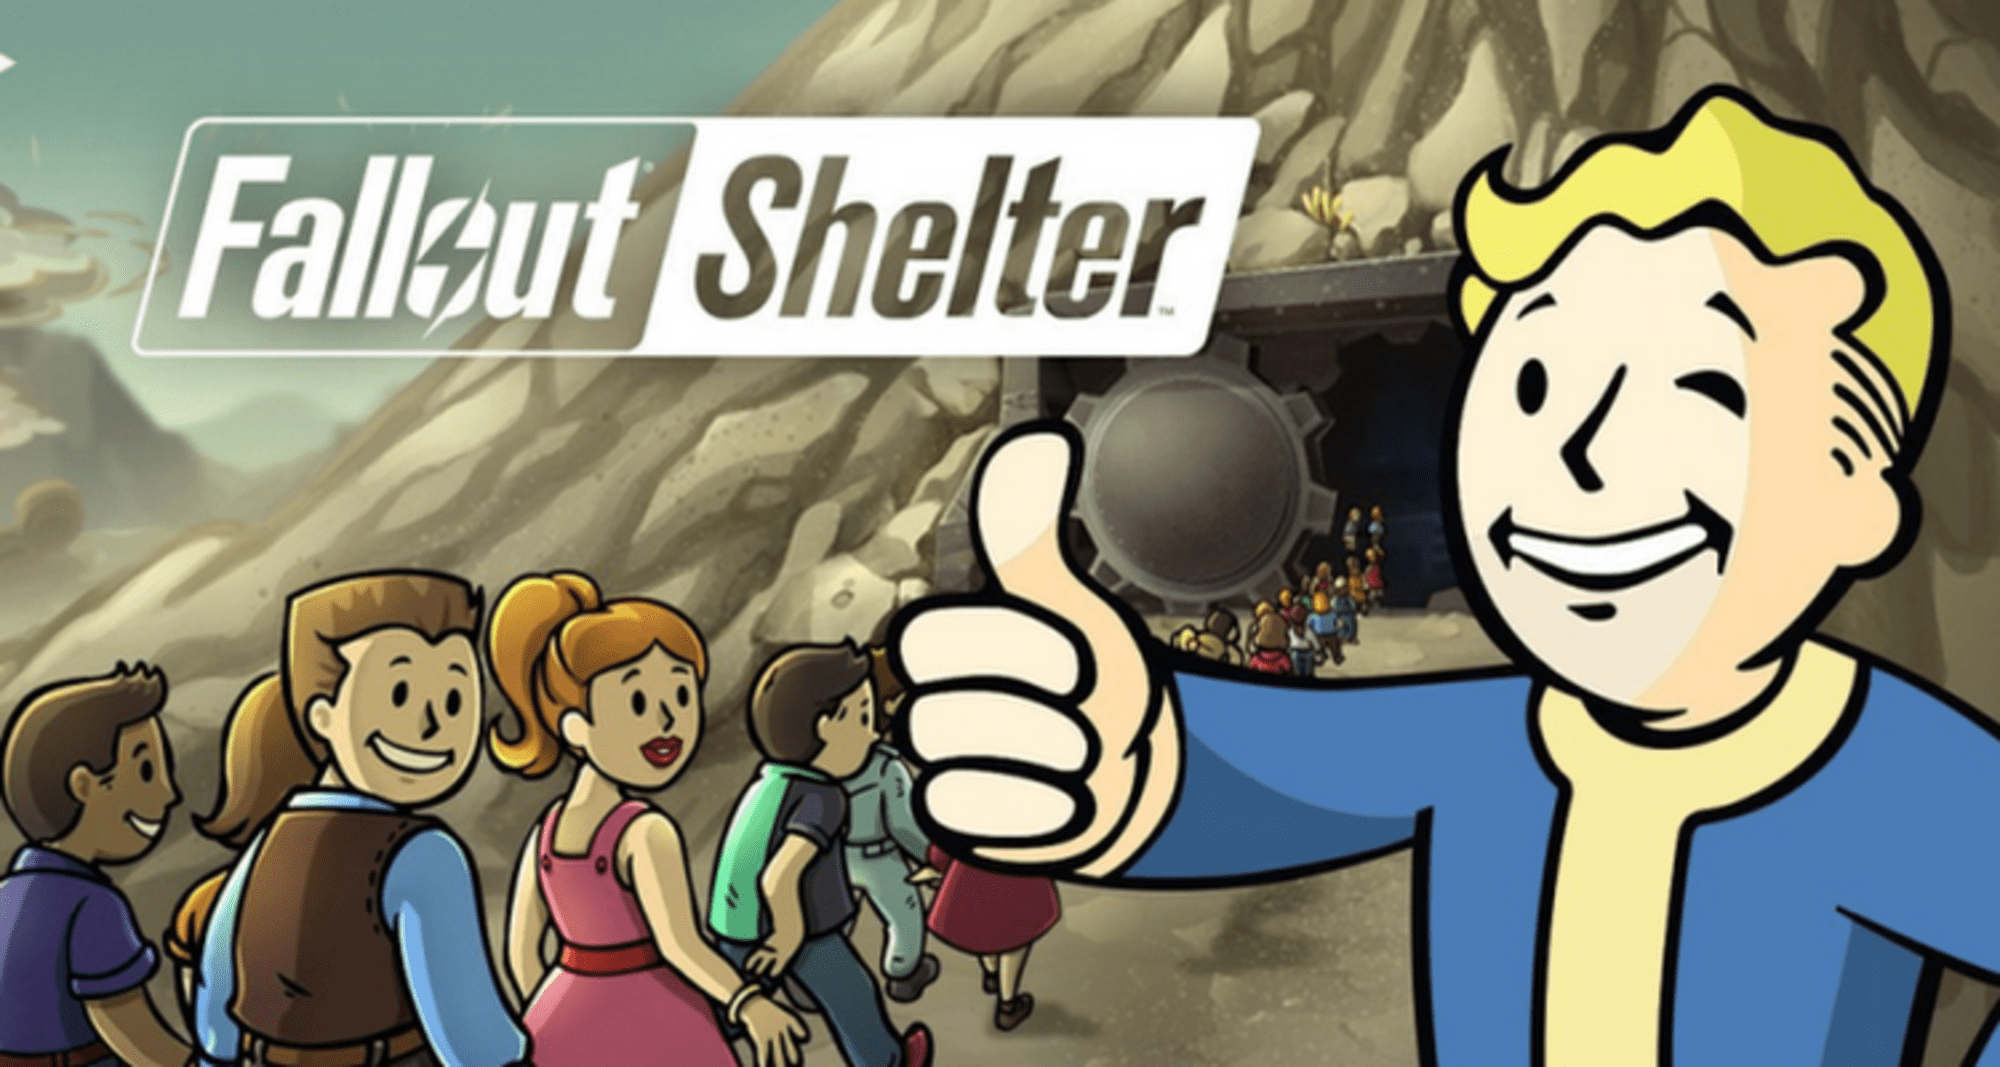 tips on fallout shelter